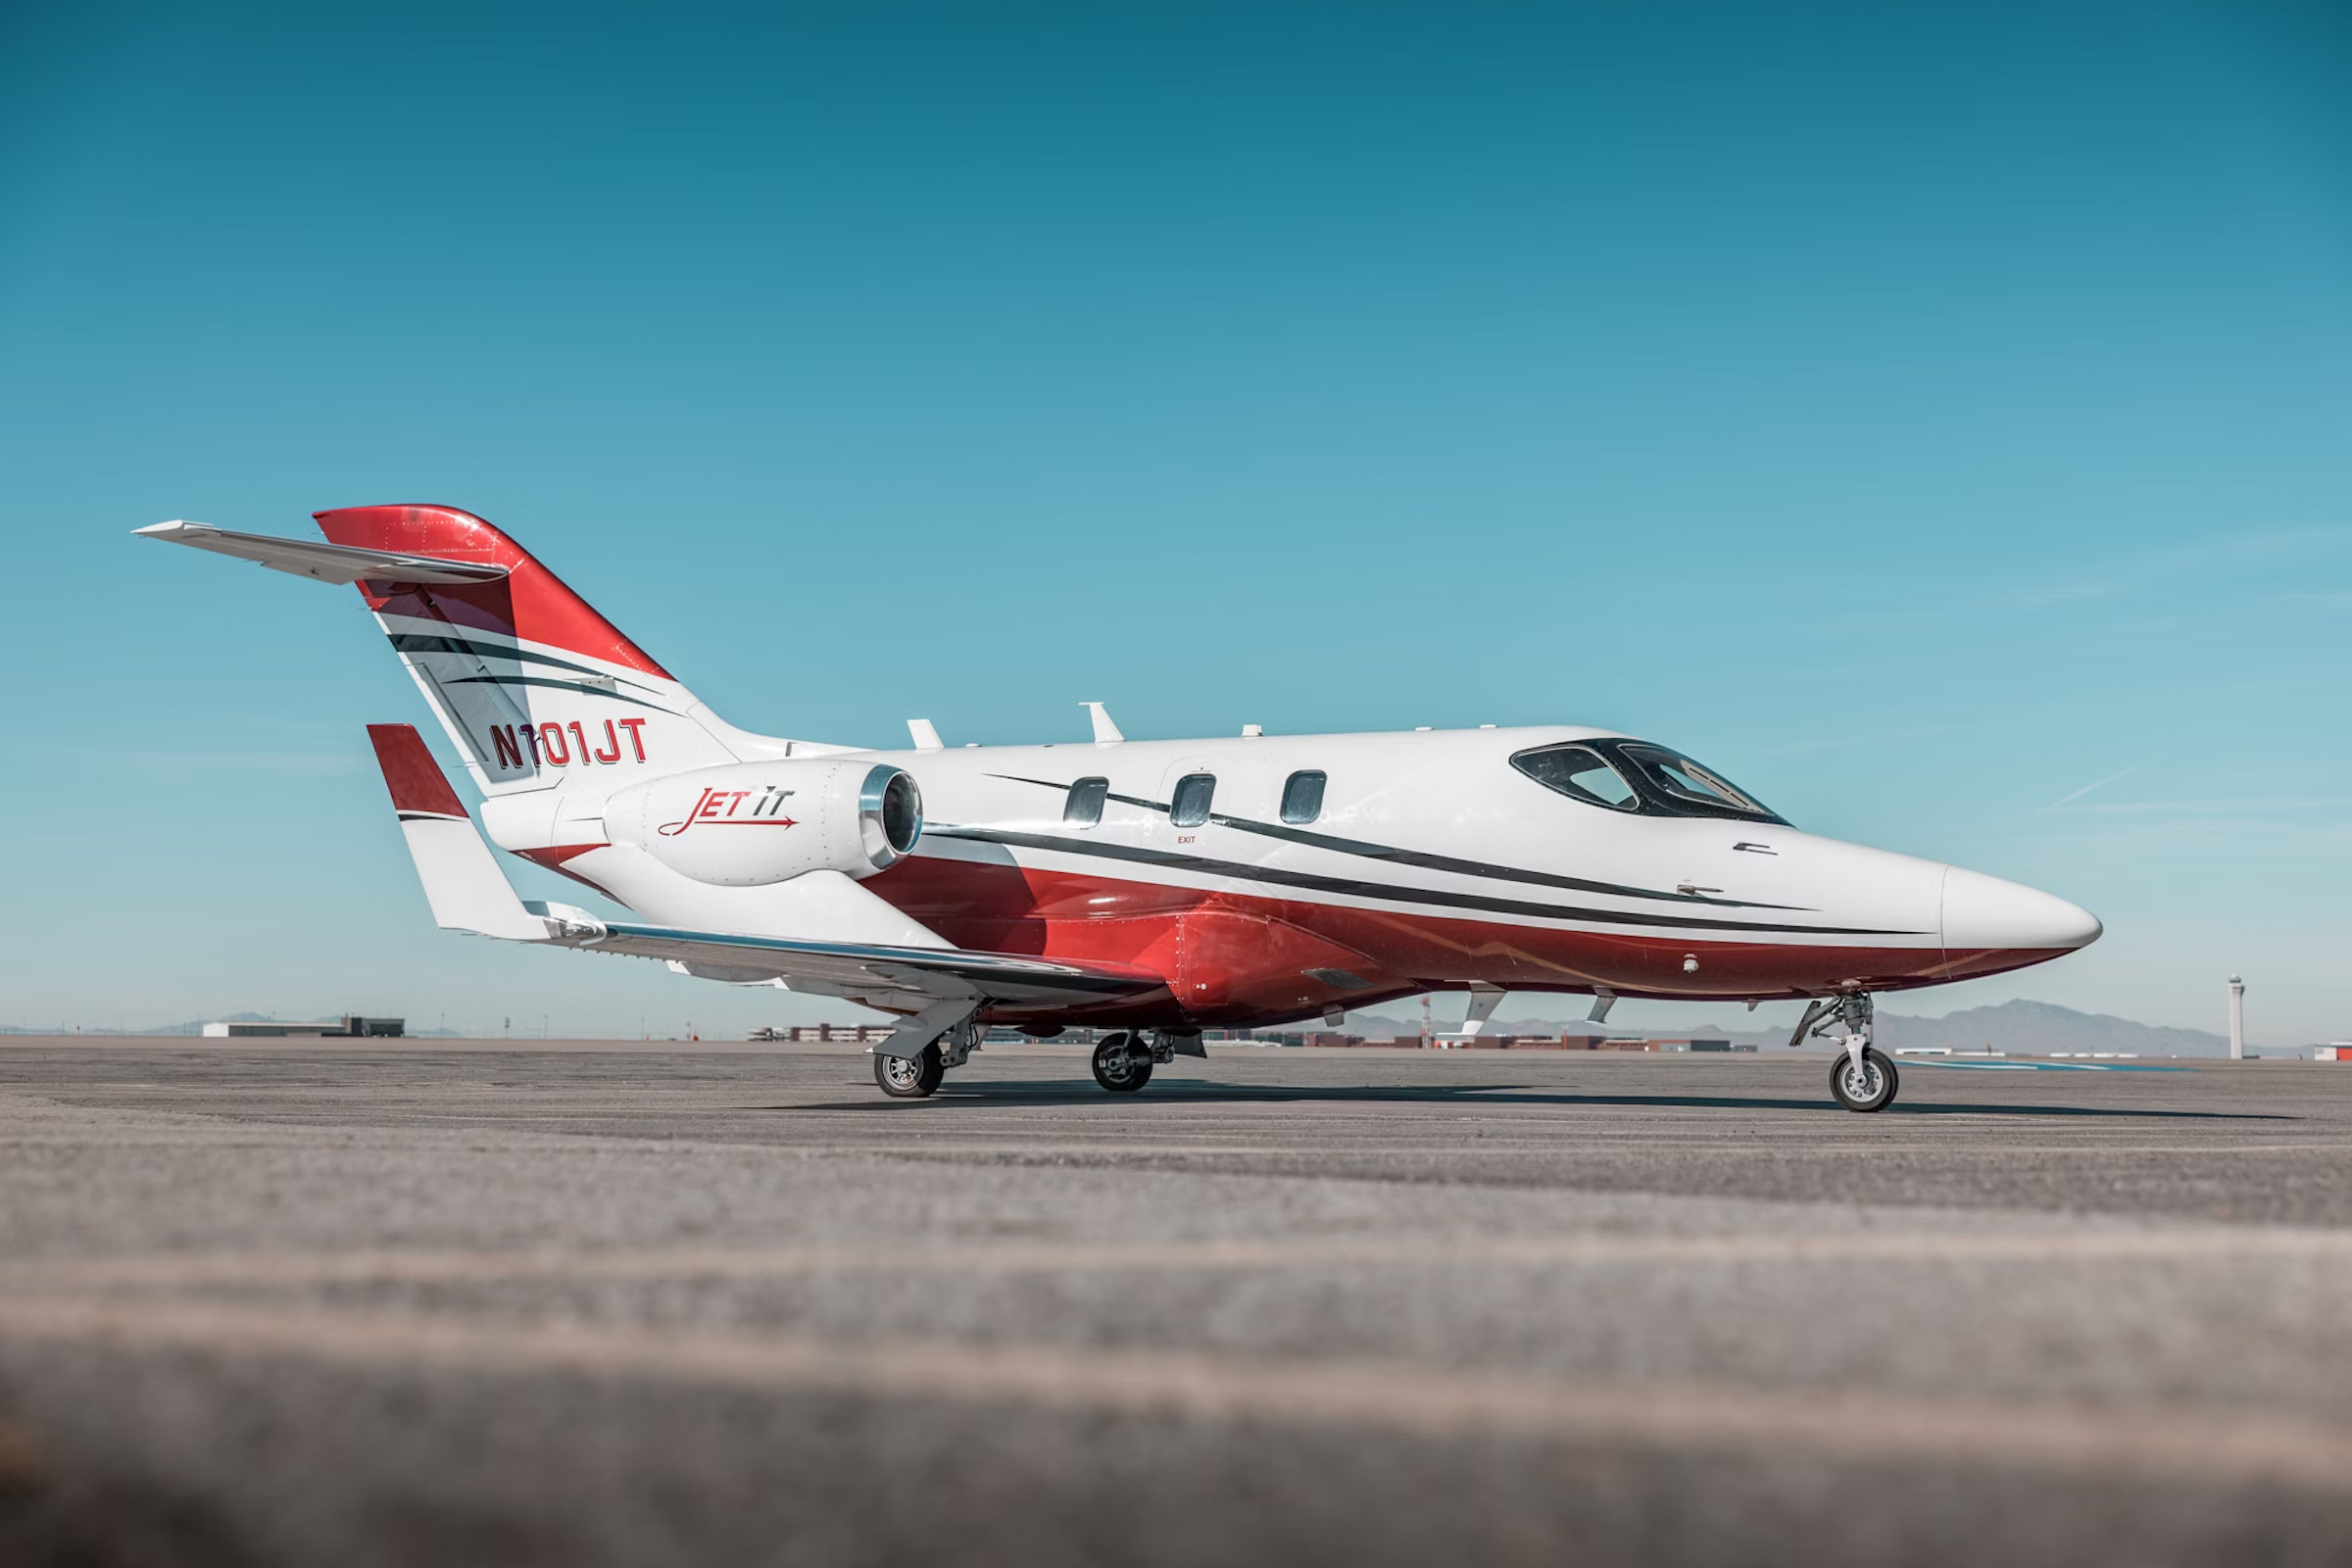 This 2019 Honda HA-420 HondaJet Elite Is a Feature-Packed ‘AircraftForSale’ Top Pick